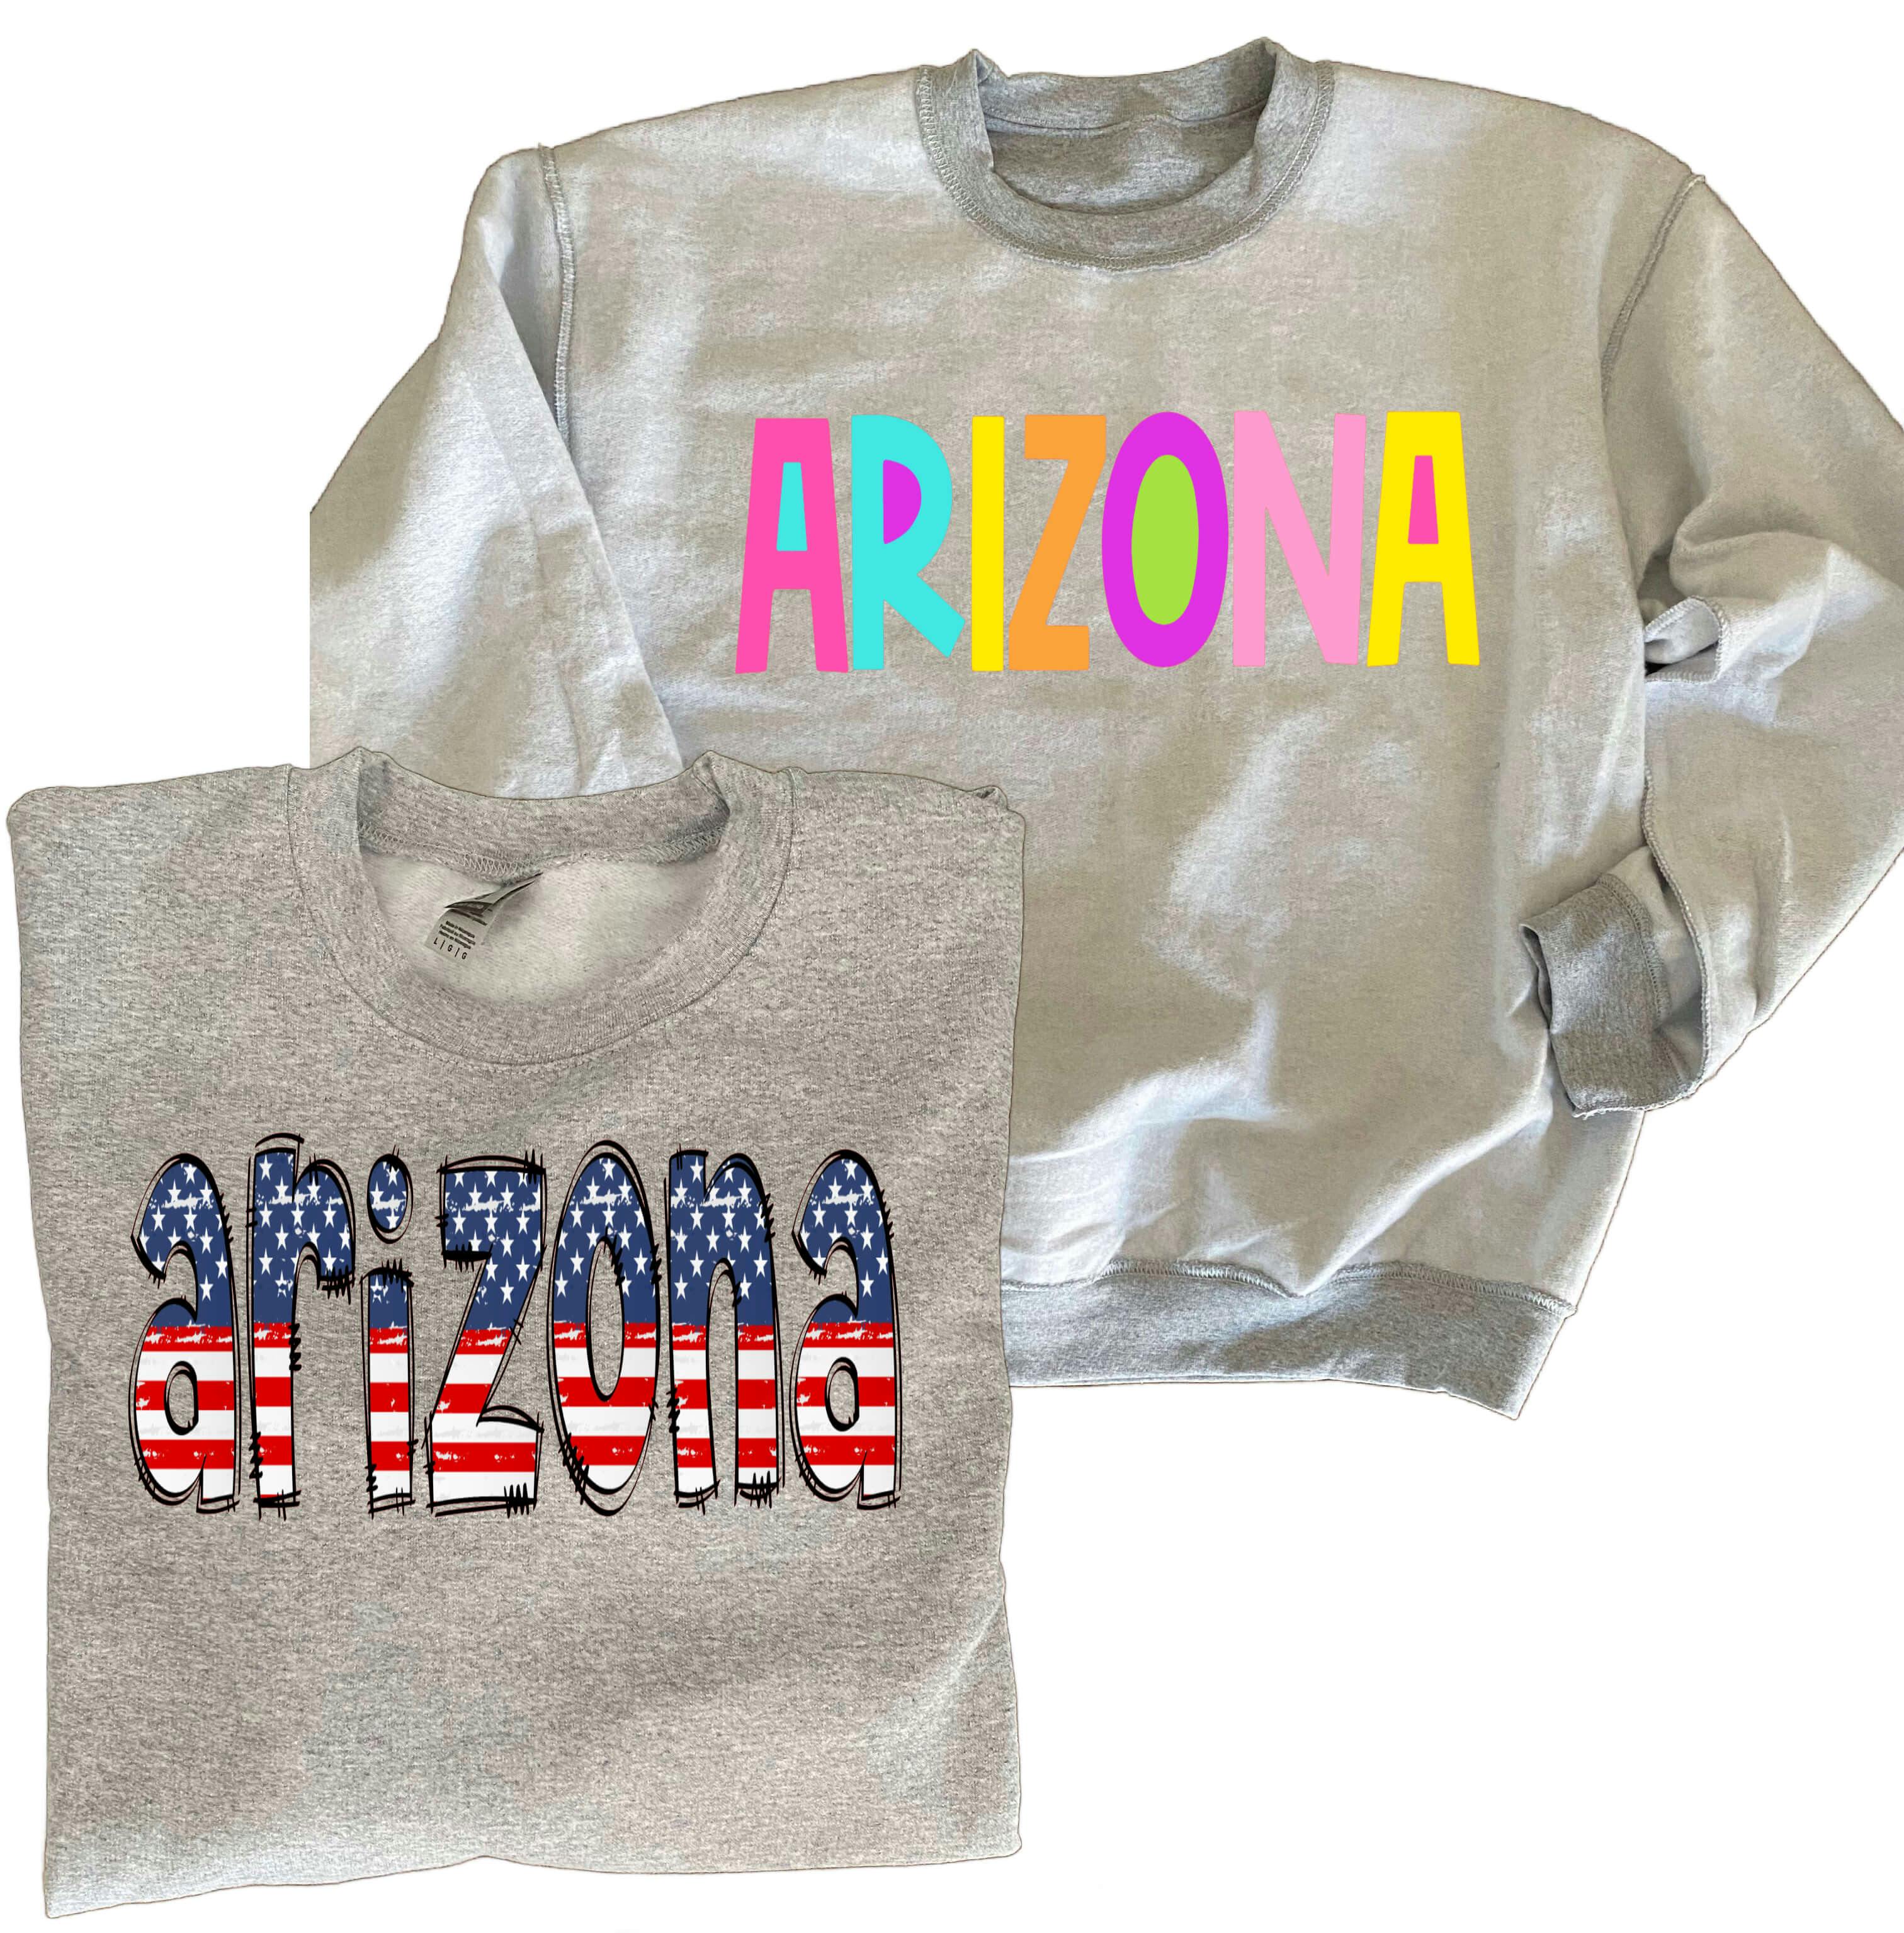 Reversible State Name Sweatshirt - undefined - The Sassy Seamstress